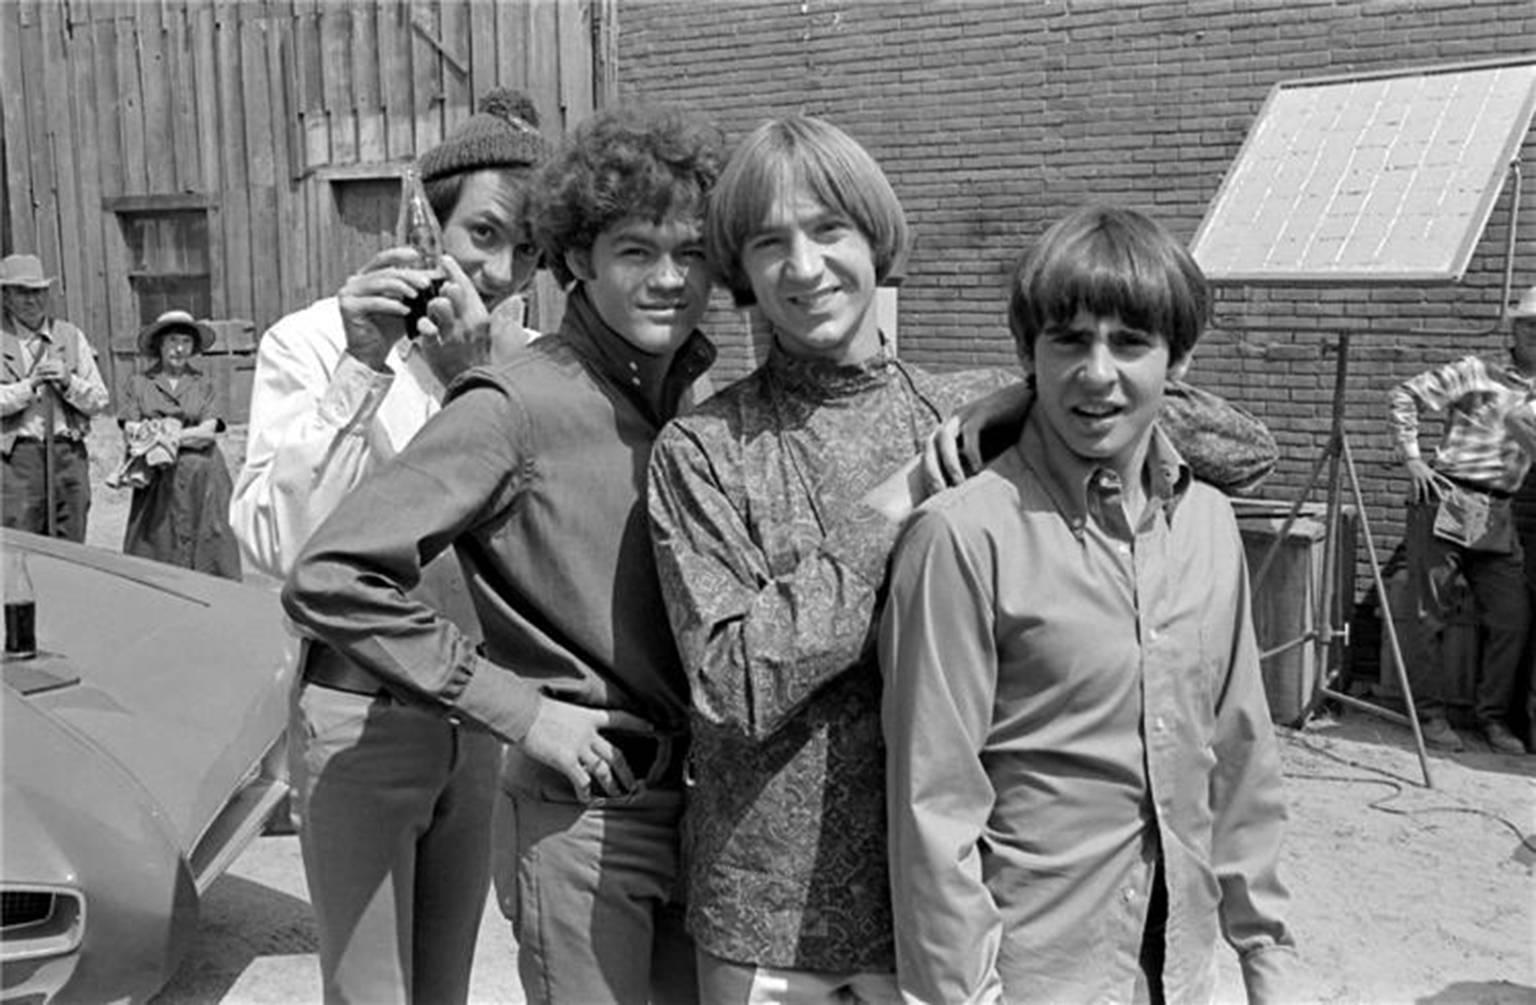 Henry Diltz Black and White Photograph – Monkees 